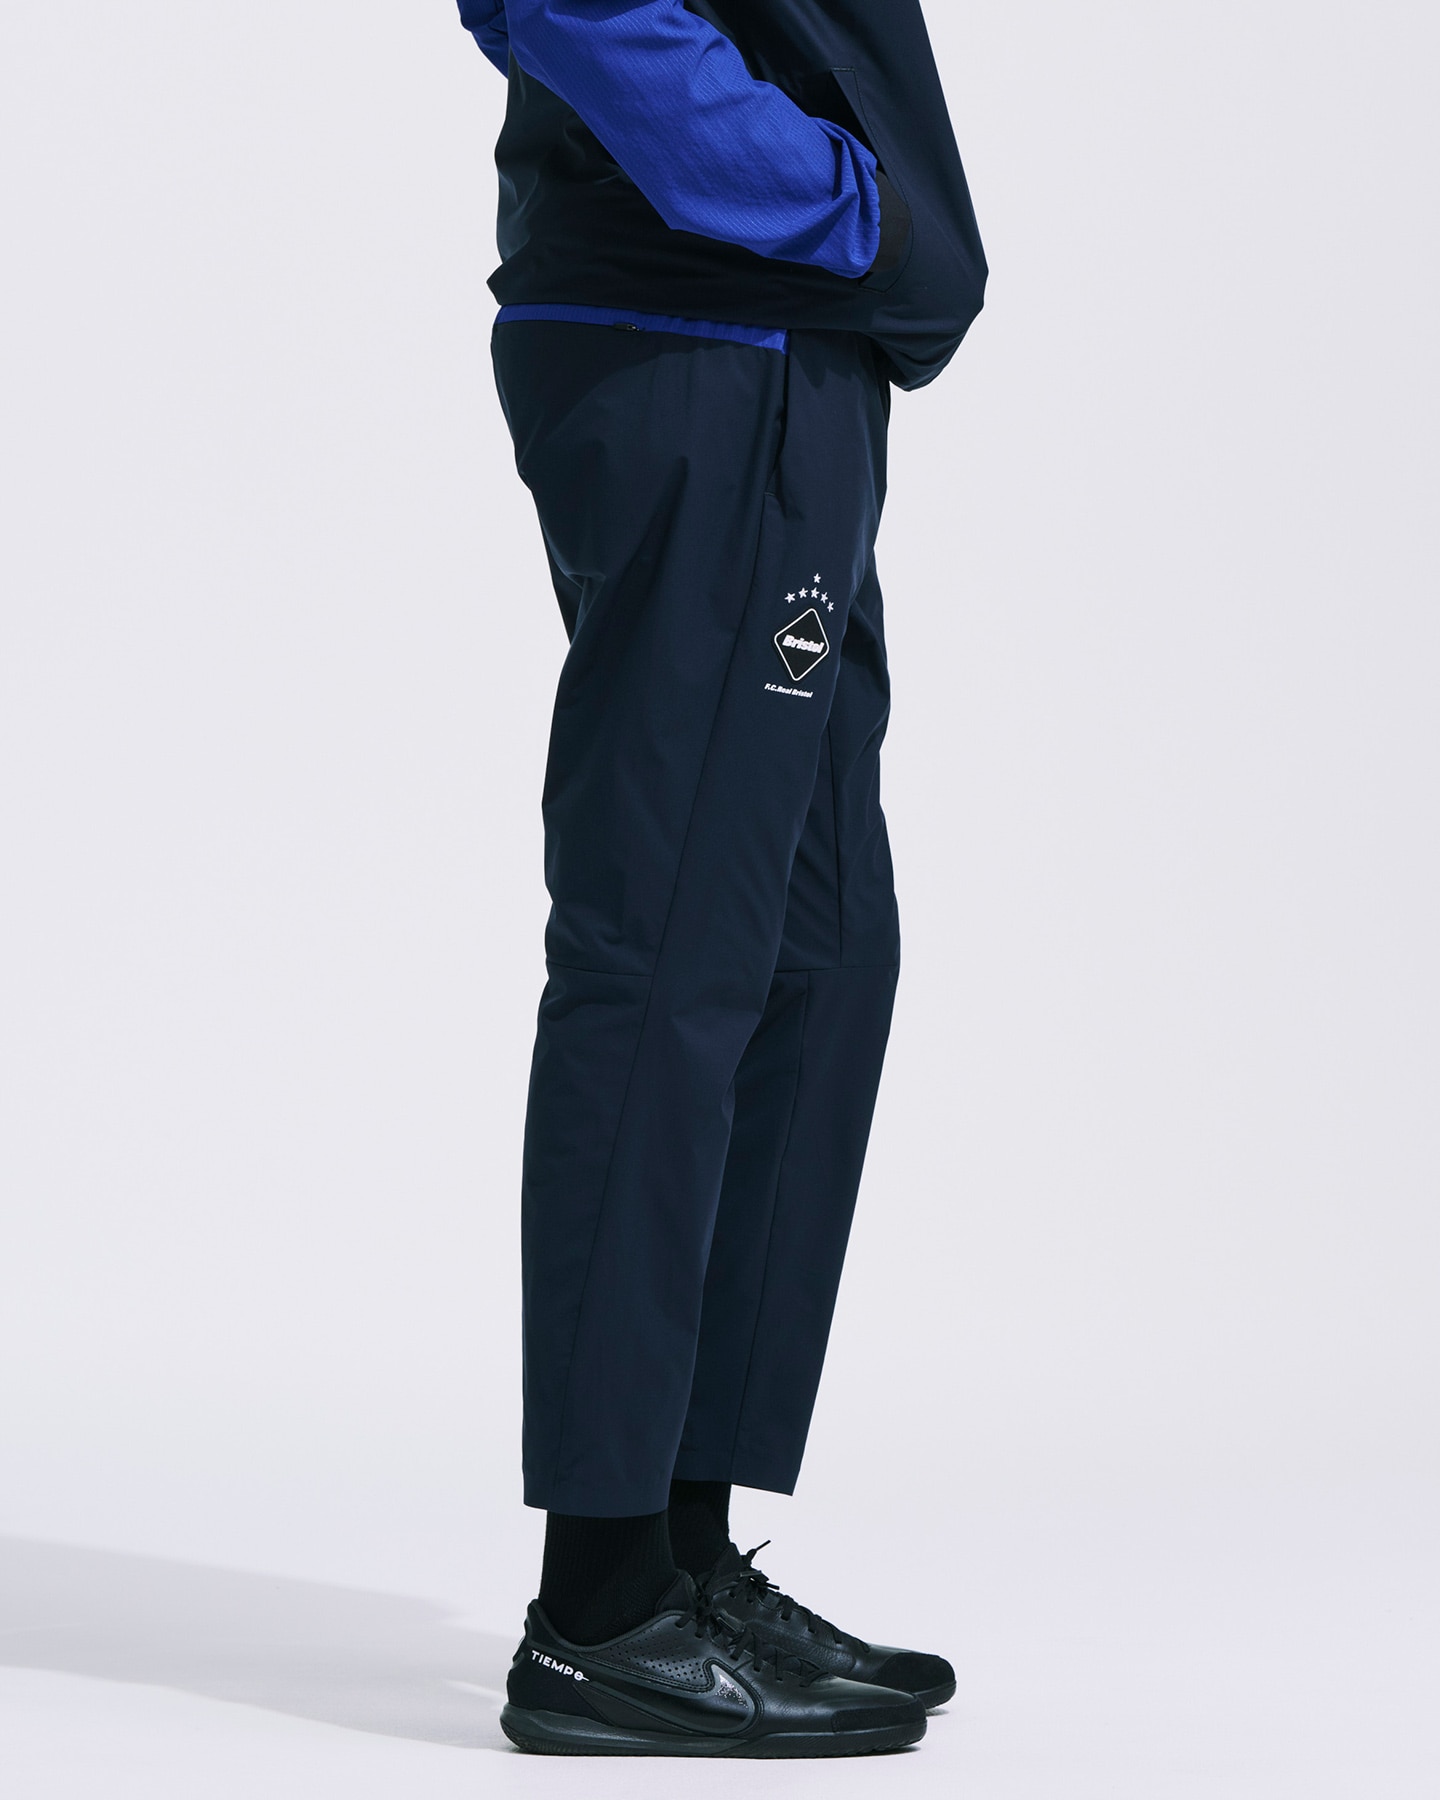 SOPH. | STRETCH LIGHT WEIGHT EASY TAPERED PANTS(M NAVY):